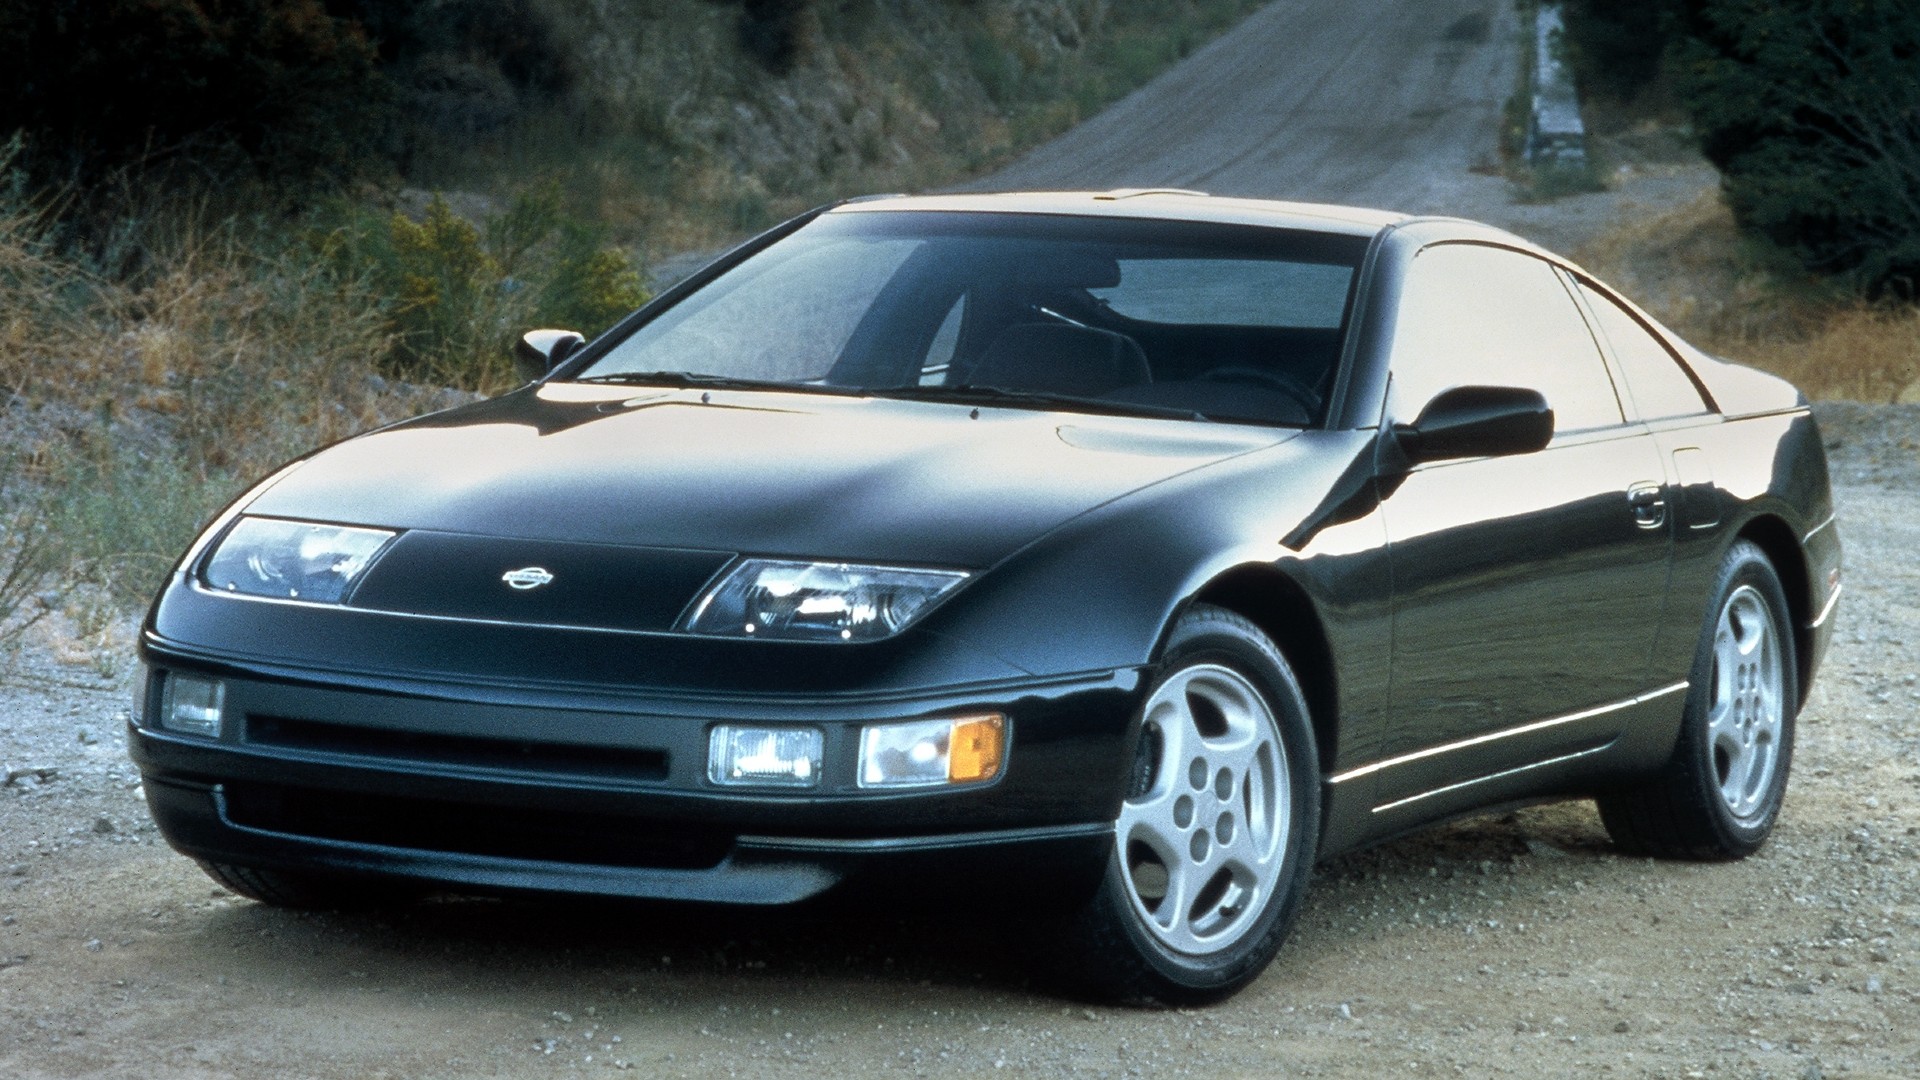 Why The Mk3 Supra Is An Underrated Dream Project Car